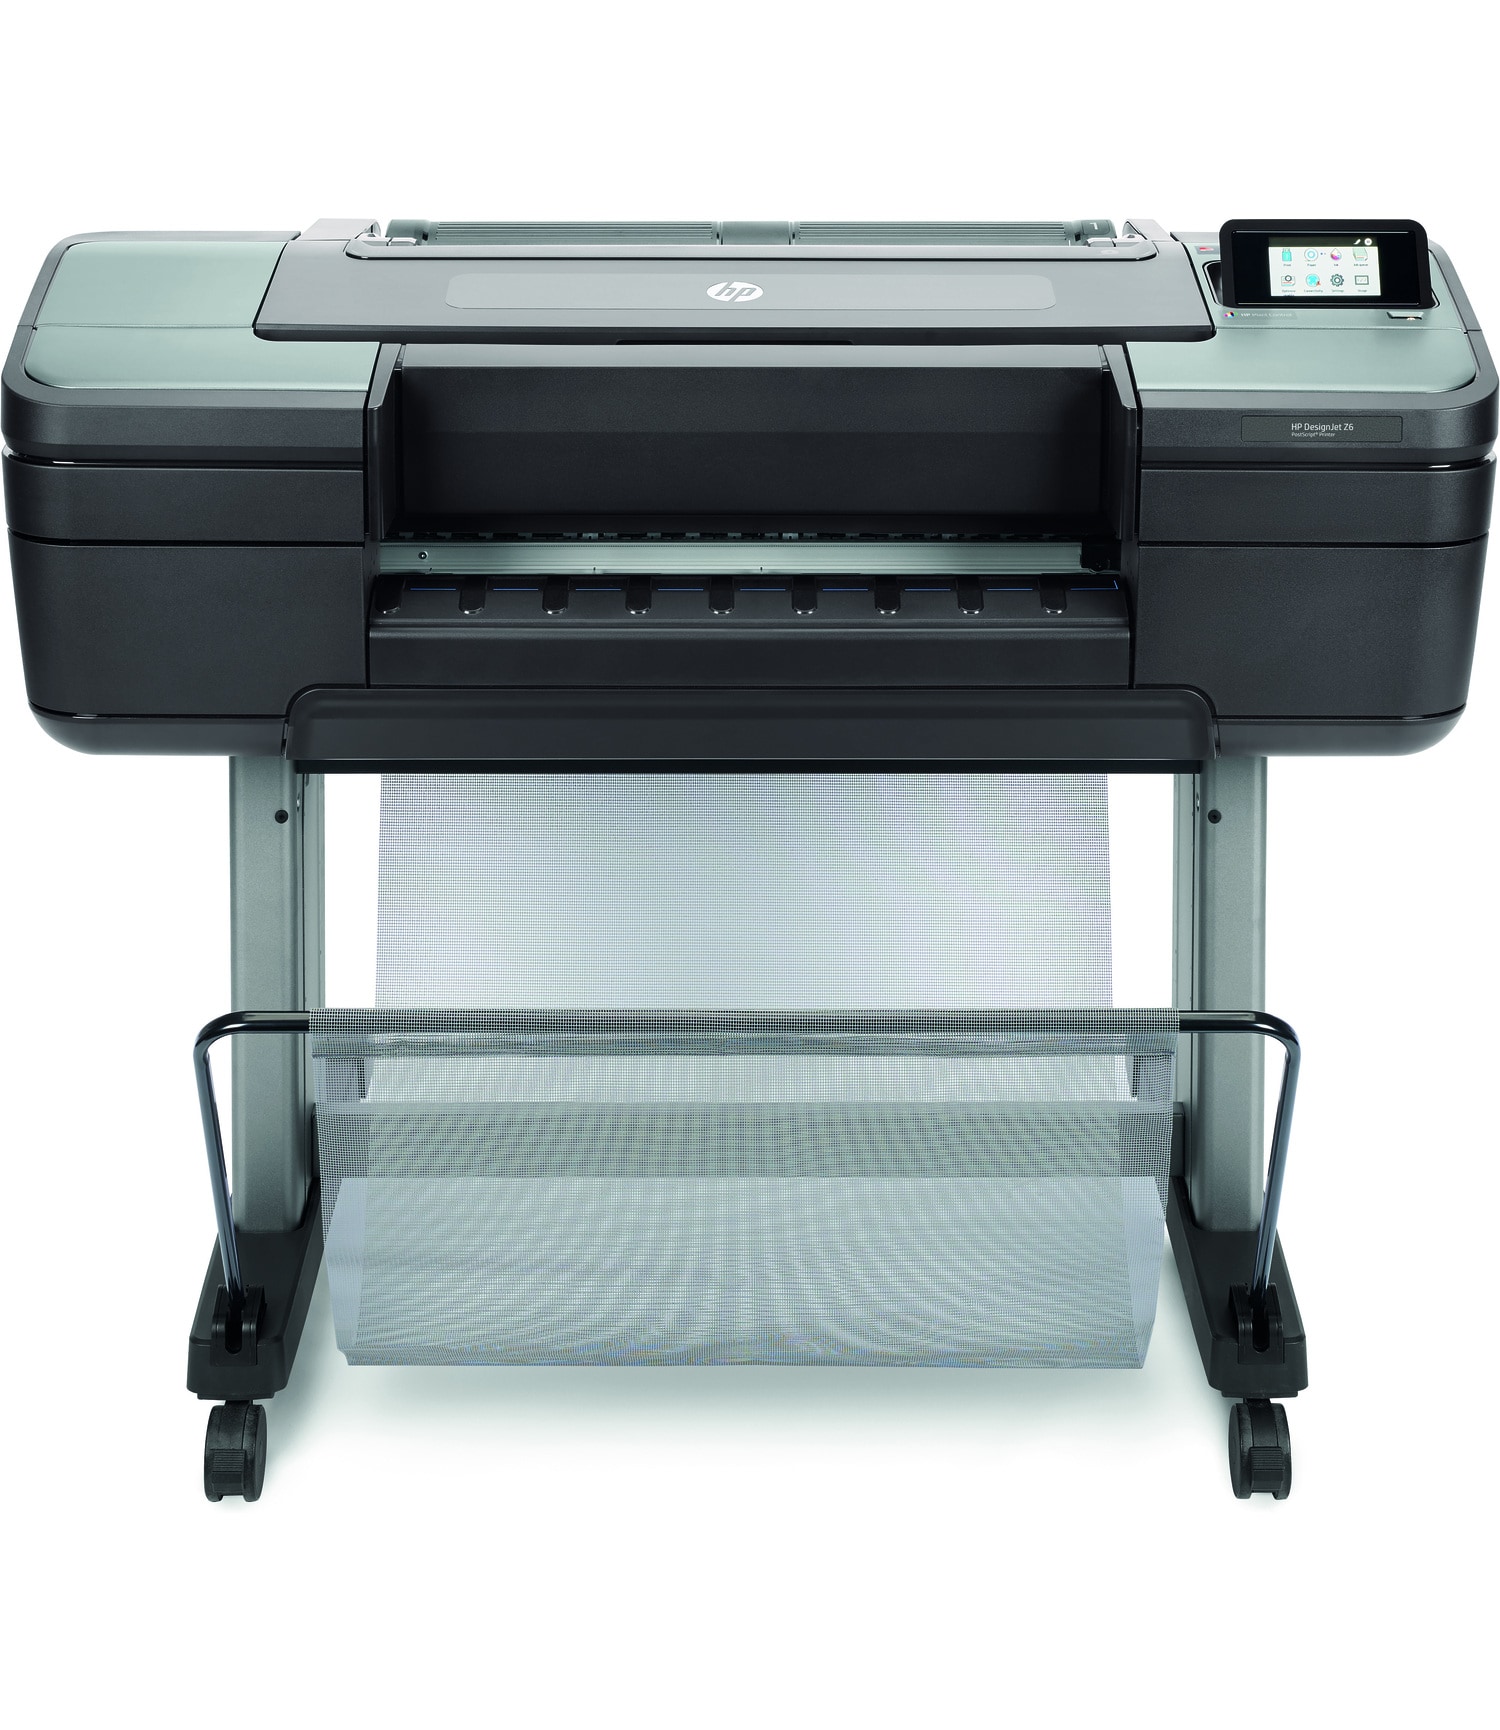 HP DesignJet Z6 Large Format PostScript® Graphics Printer - 44", with Advanced Security Features